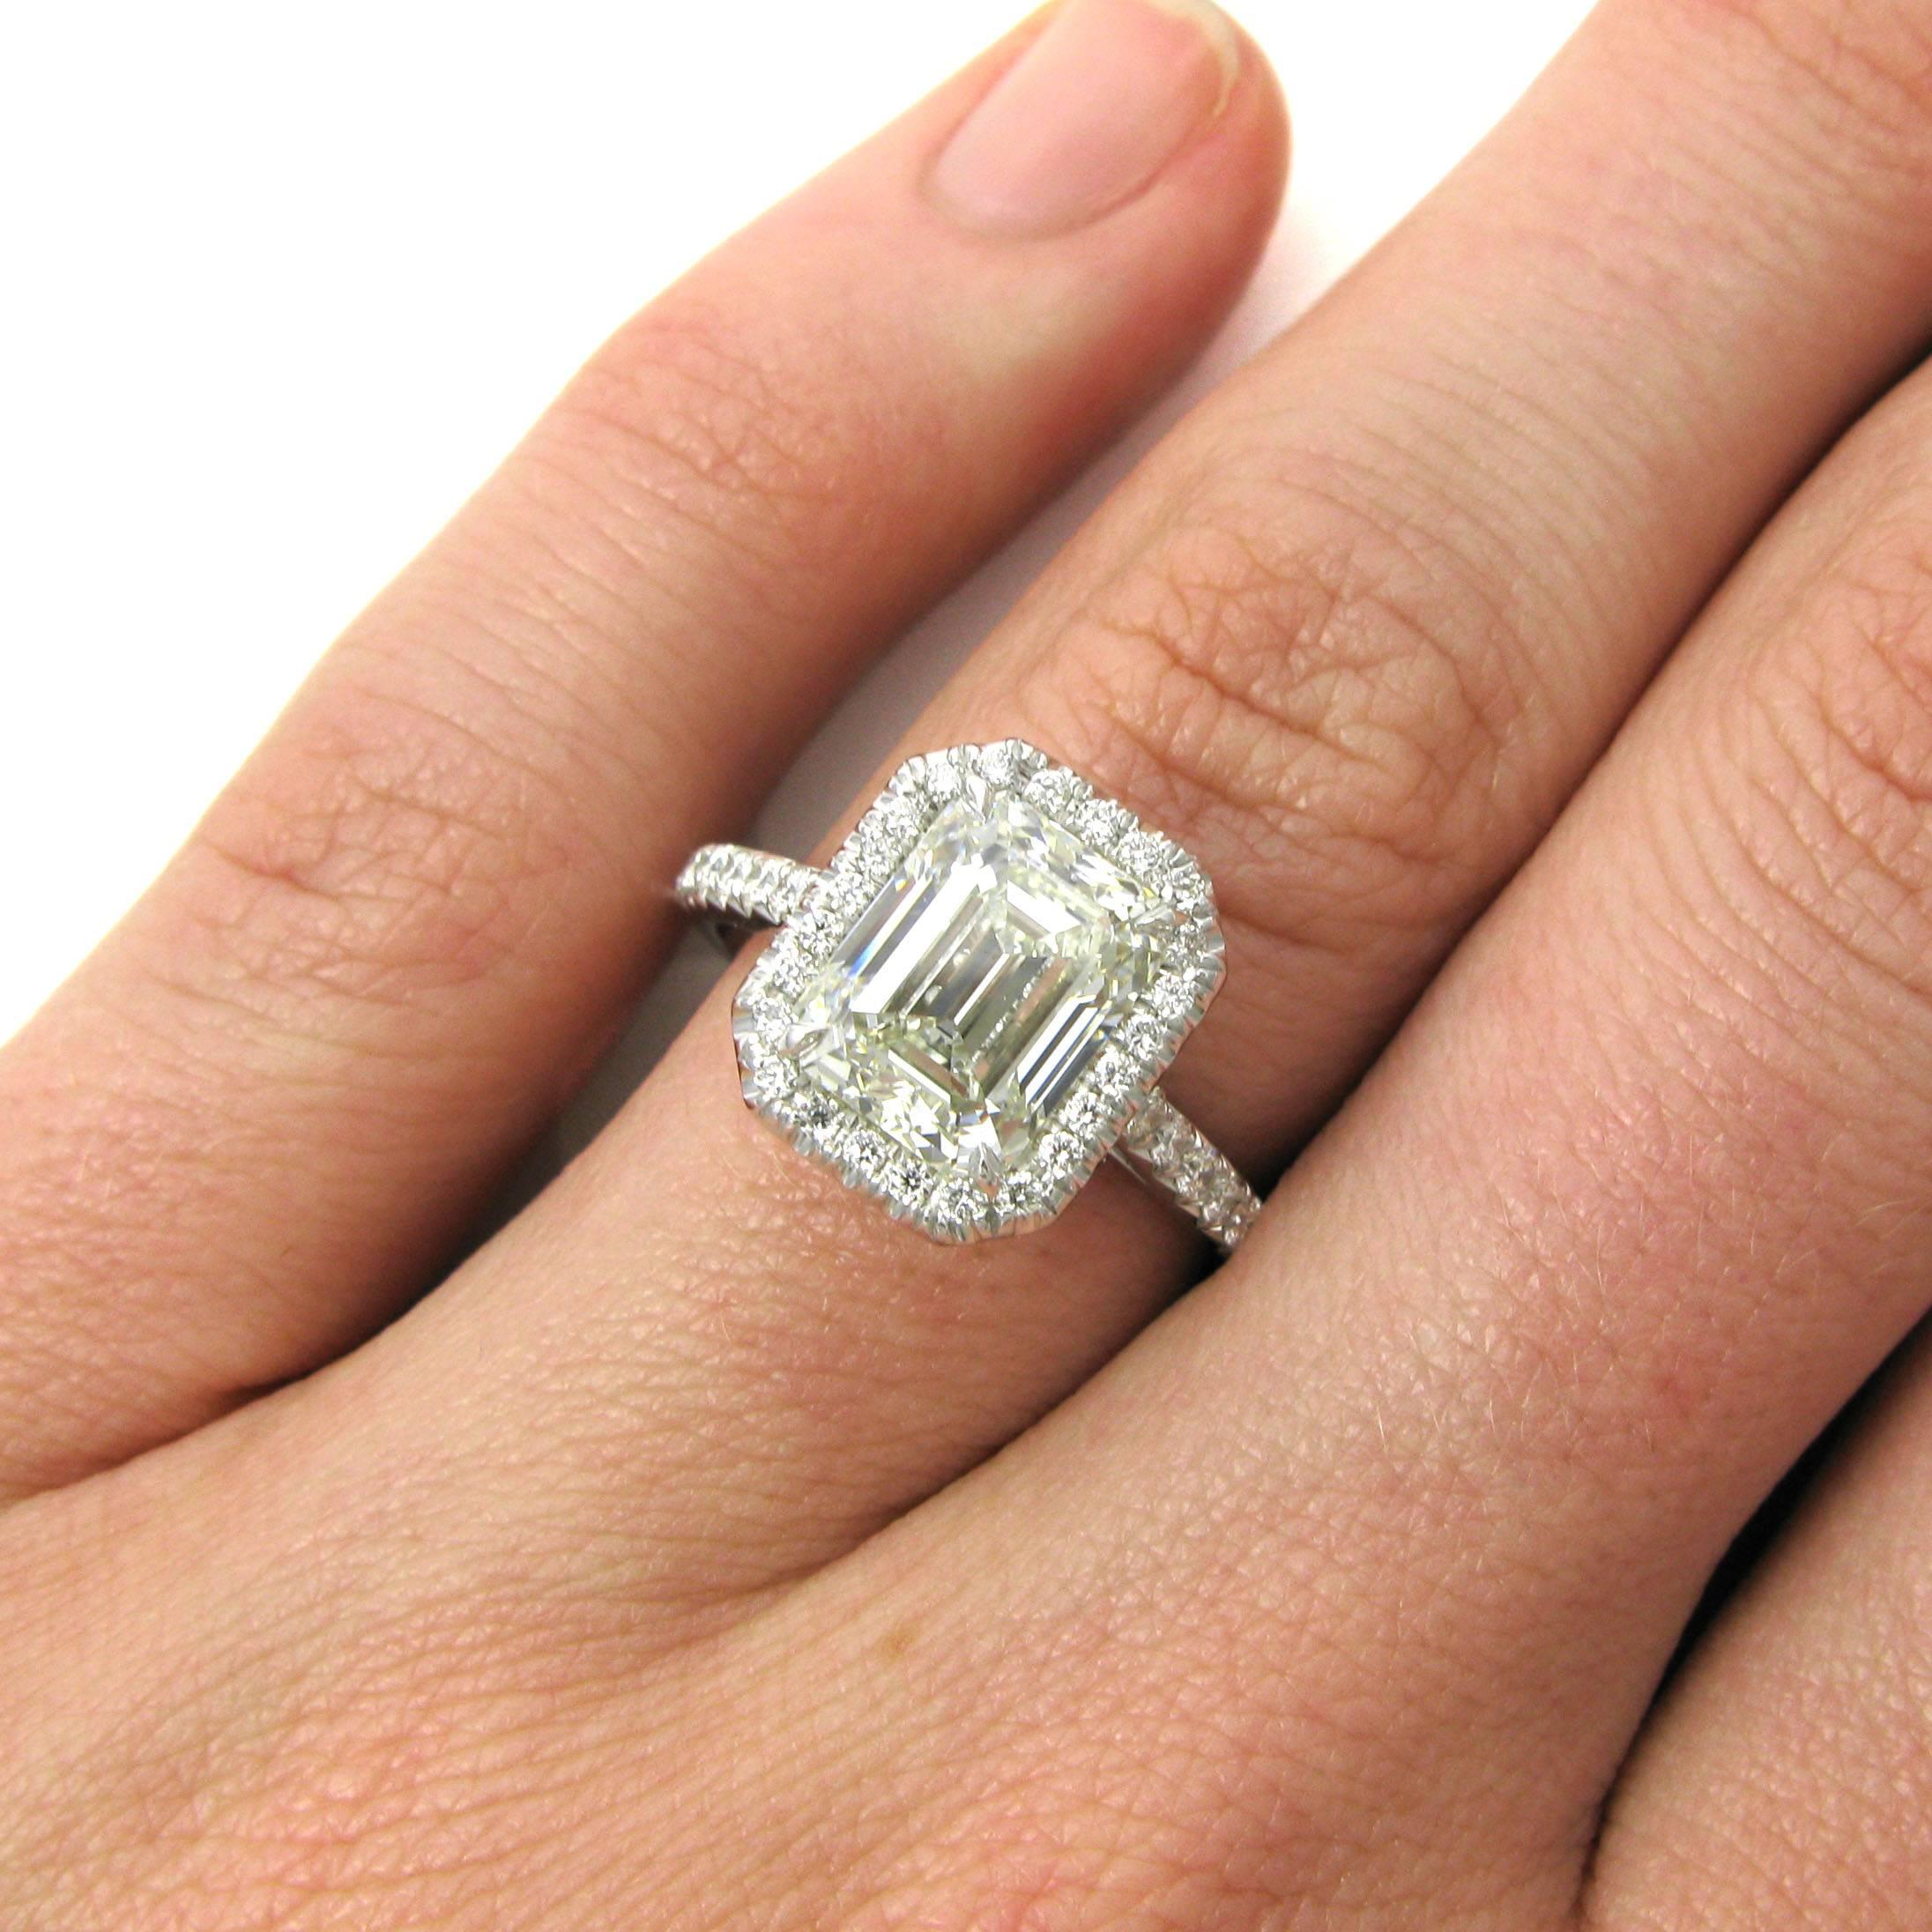 A sleek 3.01 carat emerald cut diamond with G color and VS2 clarity is set in a platinum halo frame ring studded with approx. 0.45 carat total of pave round rounds. 

Purchase includes GIA Diamond Grading Report 2155193152, which states that the